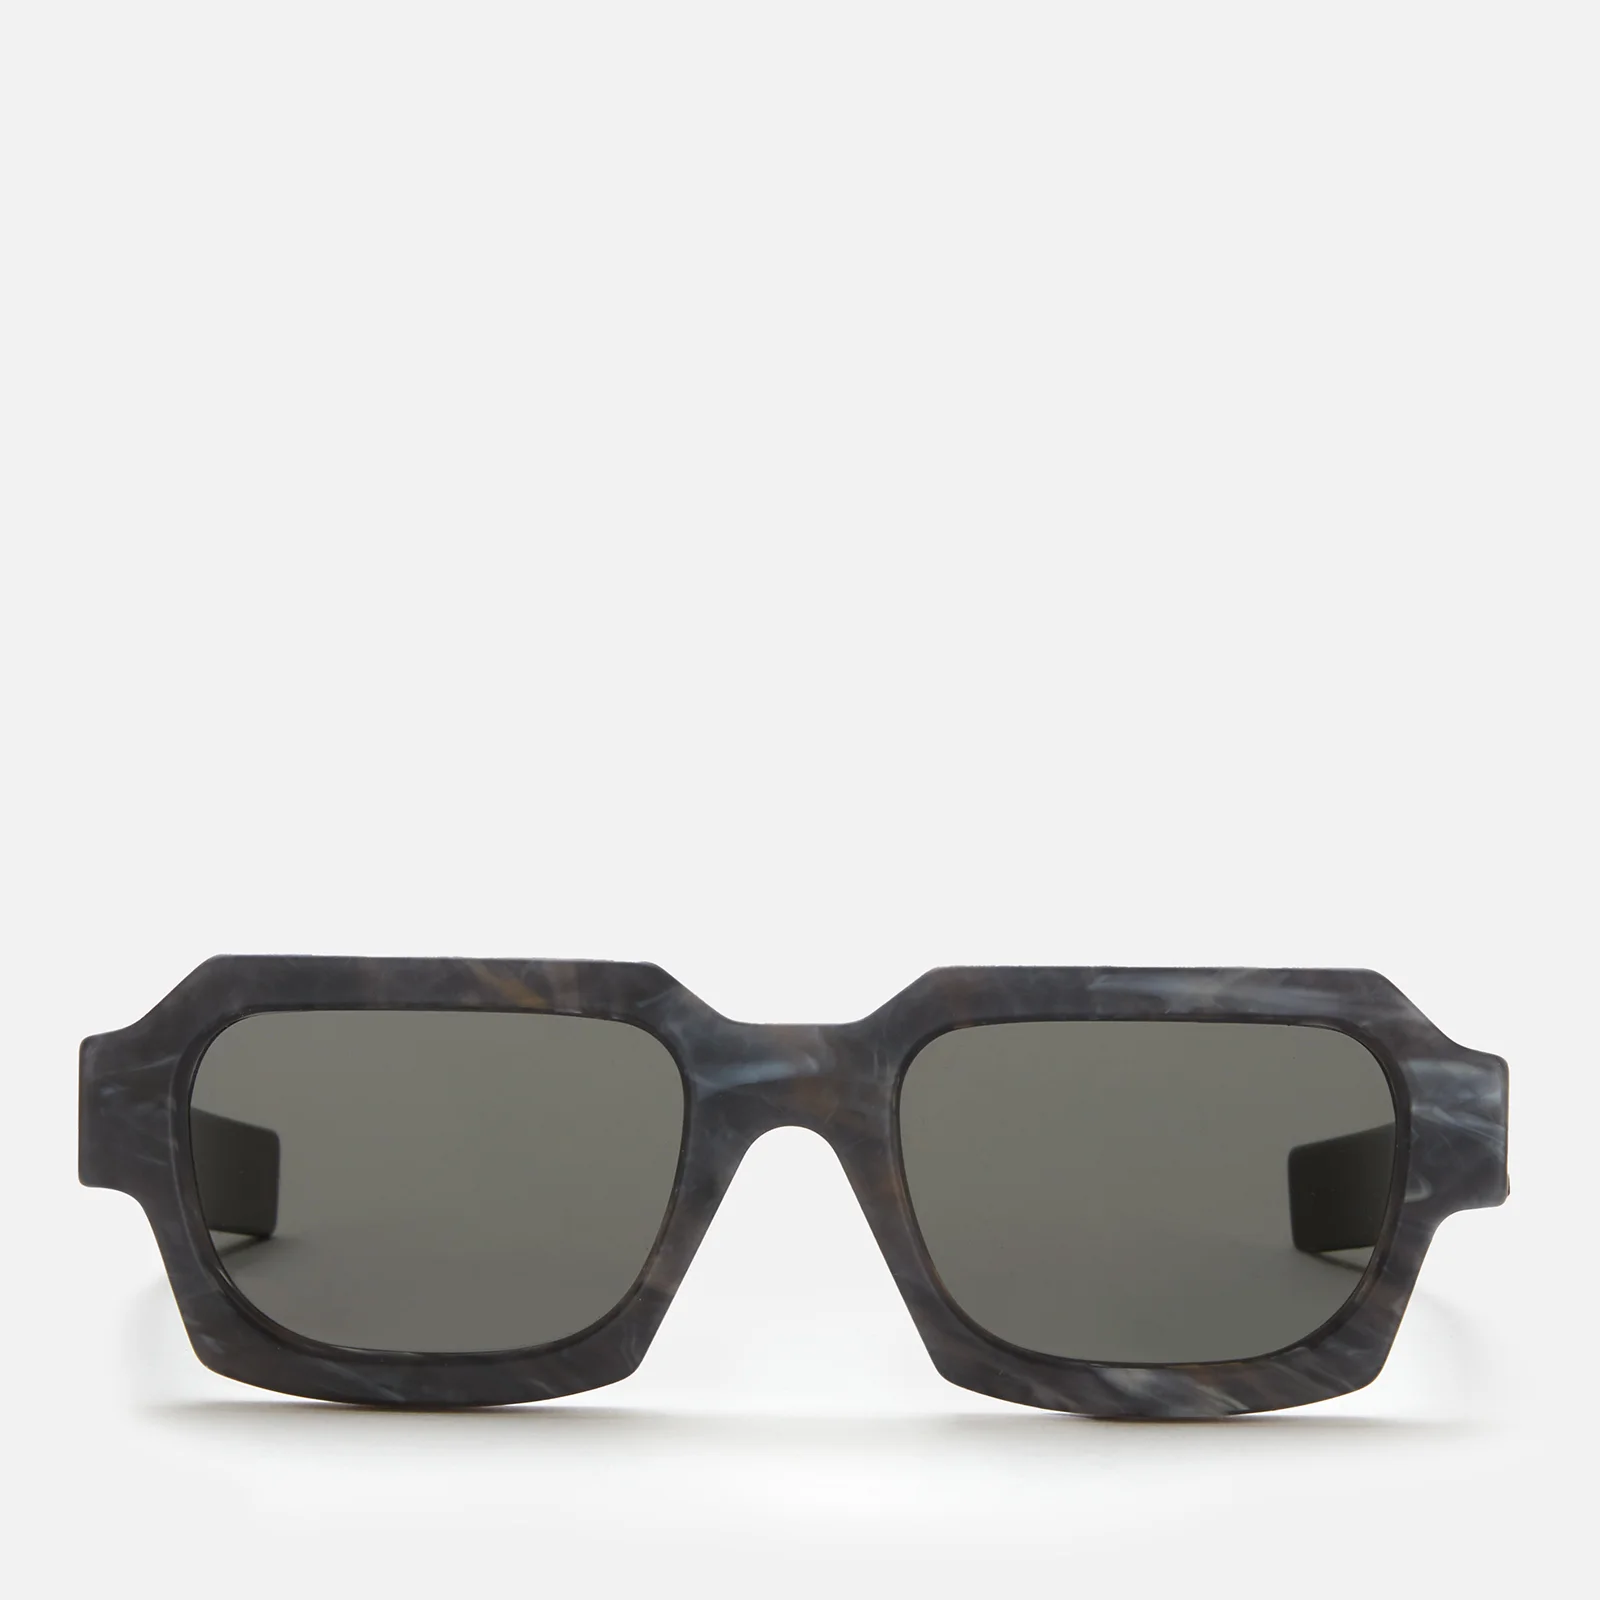 A-COLD-WALL* X RSF Men's Caro Sunglasses - Black Marble Image 1